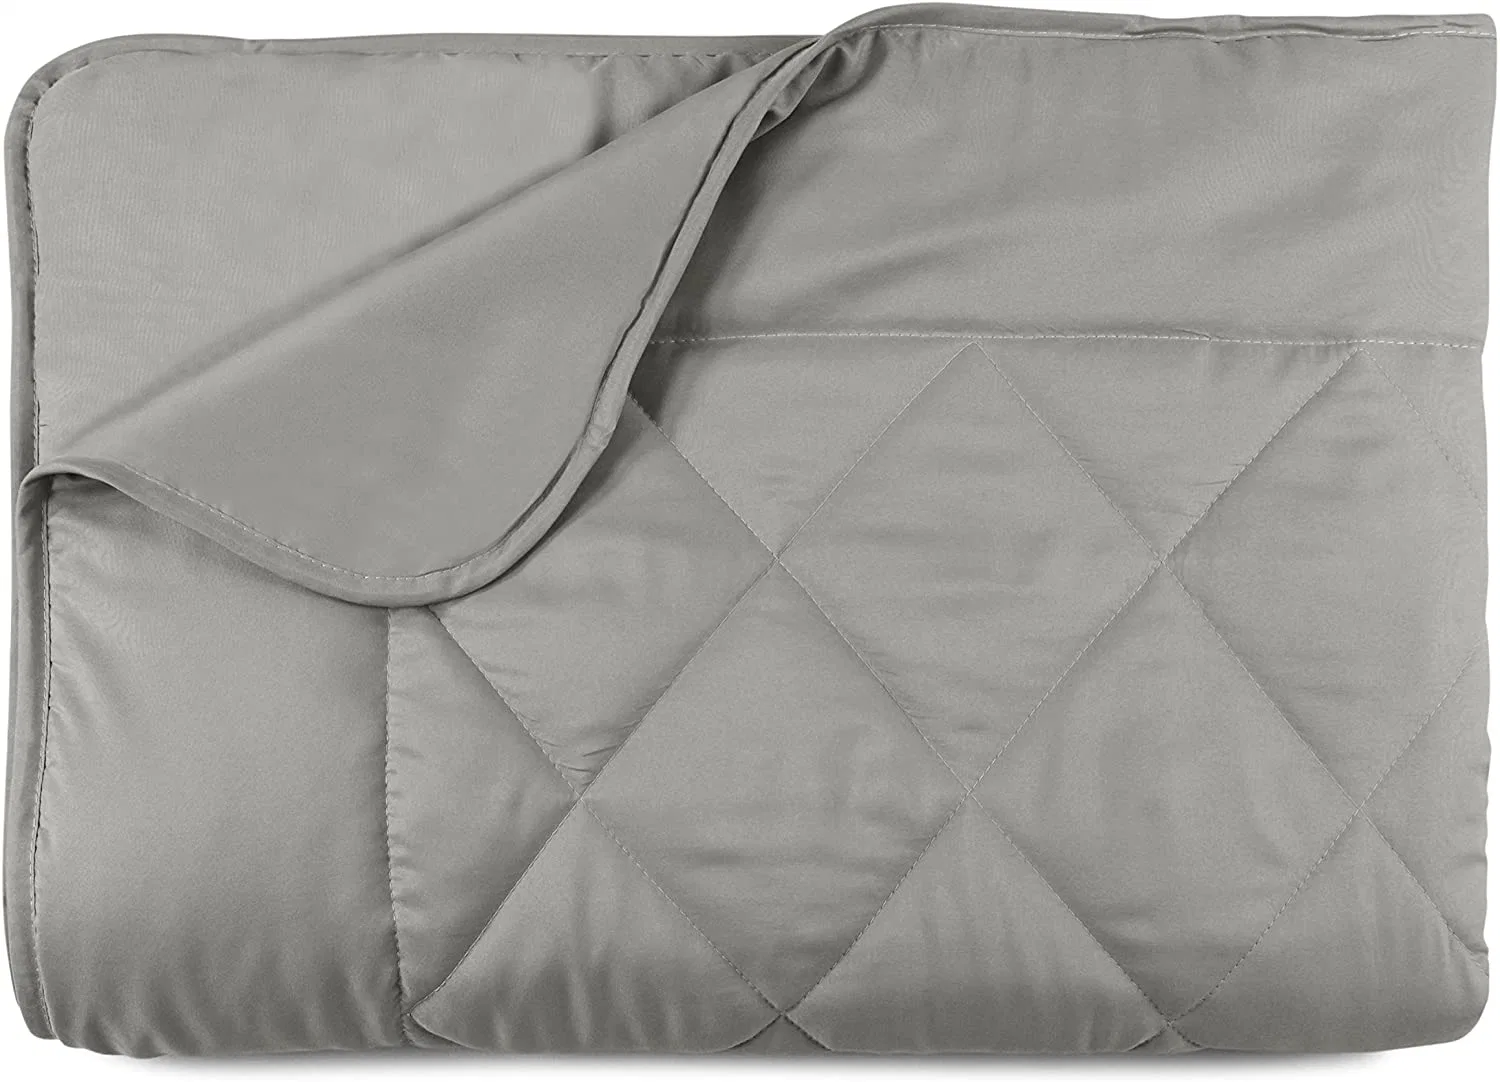 Bedding with Warm Duvet Filling, Hypoallergenic, Quilted Duvet for Allergy Sufferers